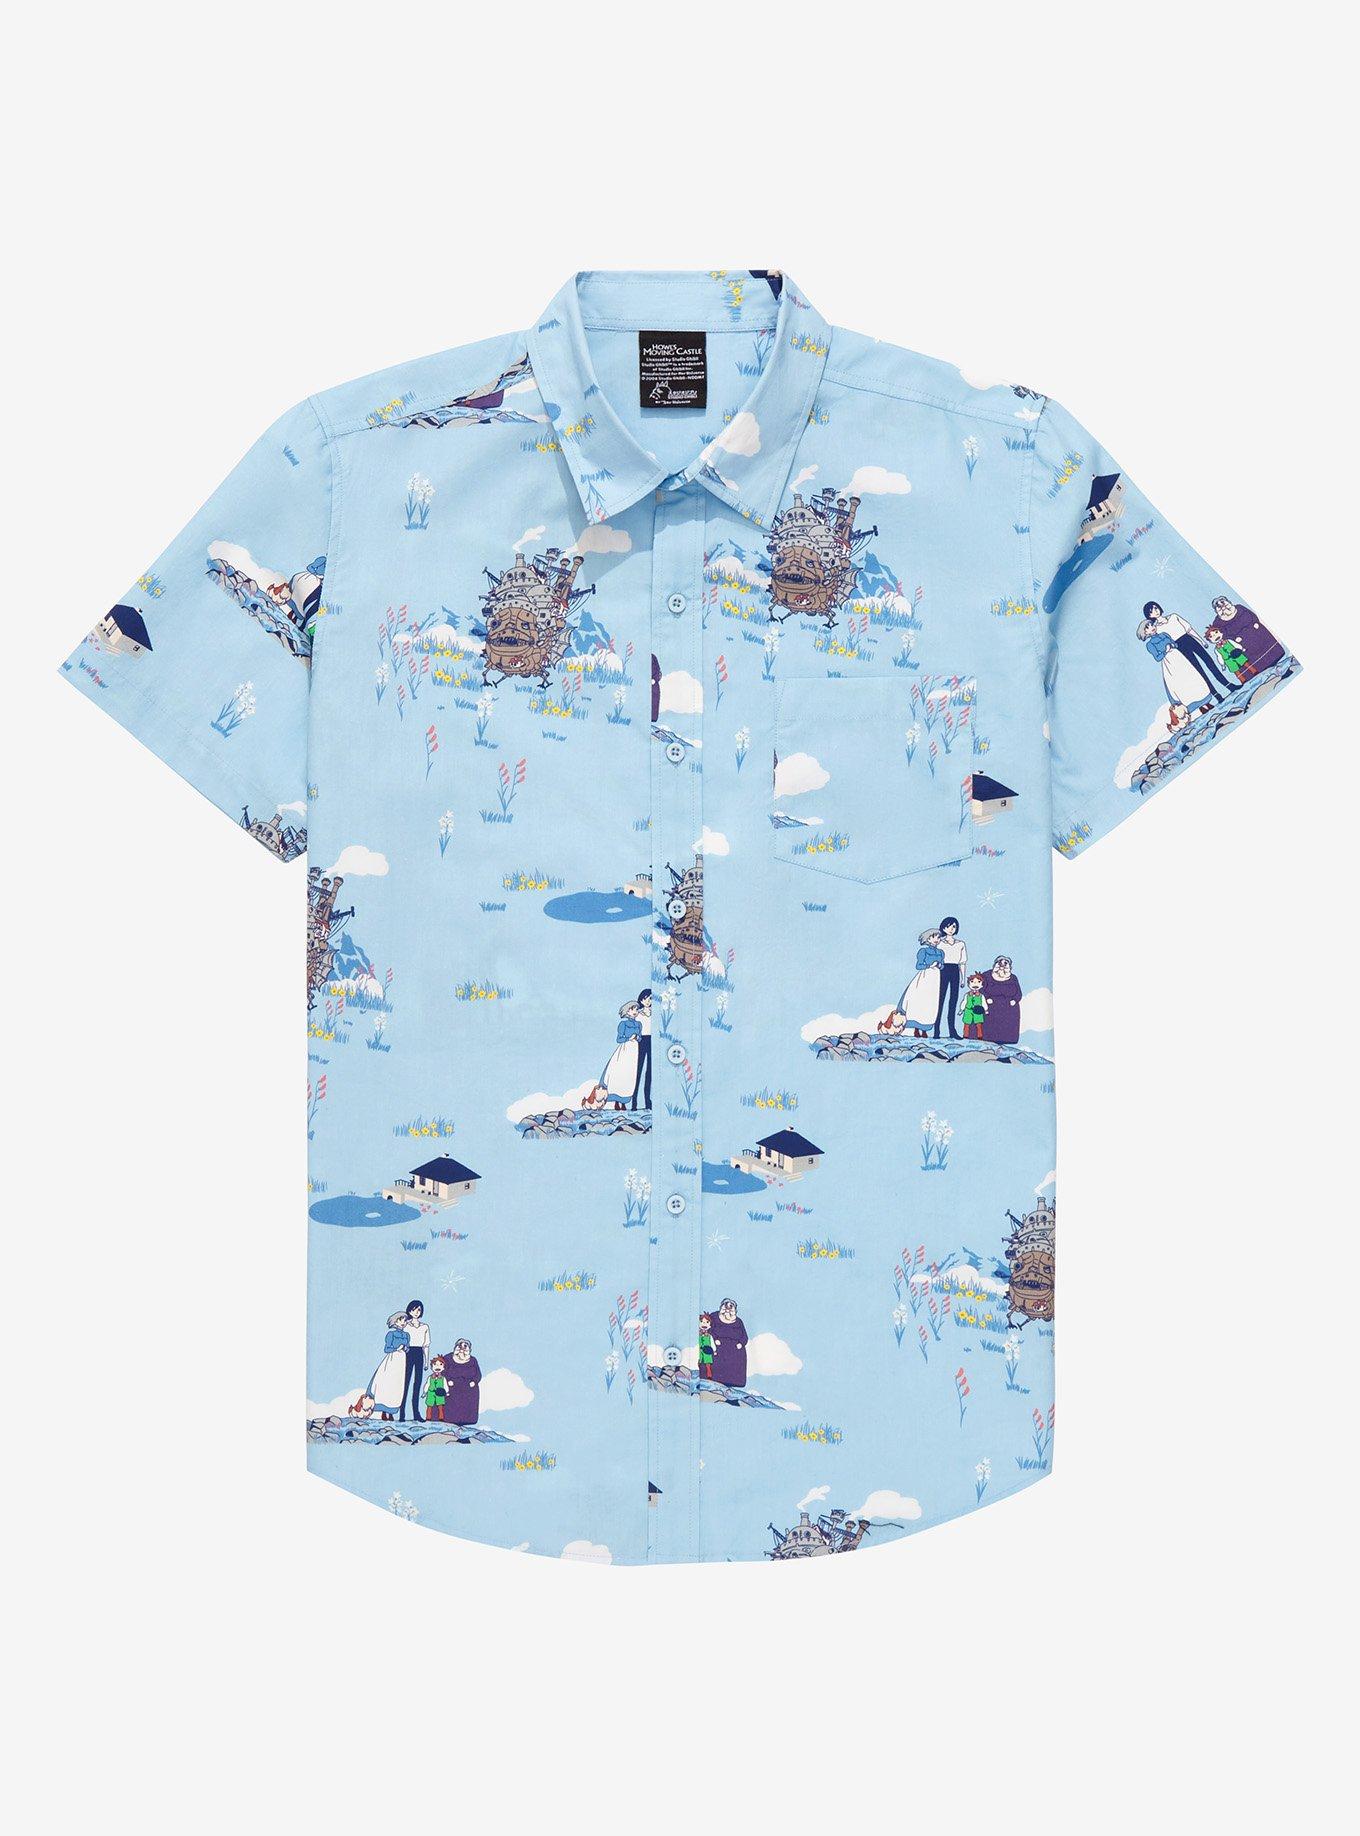 Studio Ghibli Howl’s Moving Castle Scenic Woven Button-Up - BoxLunch ...